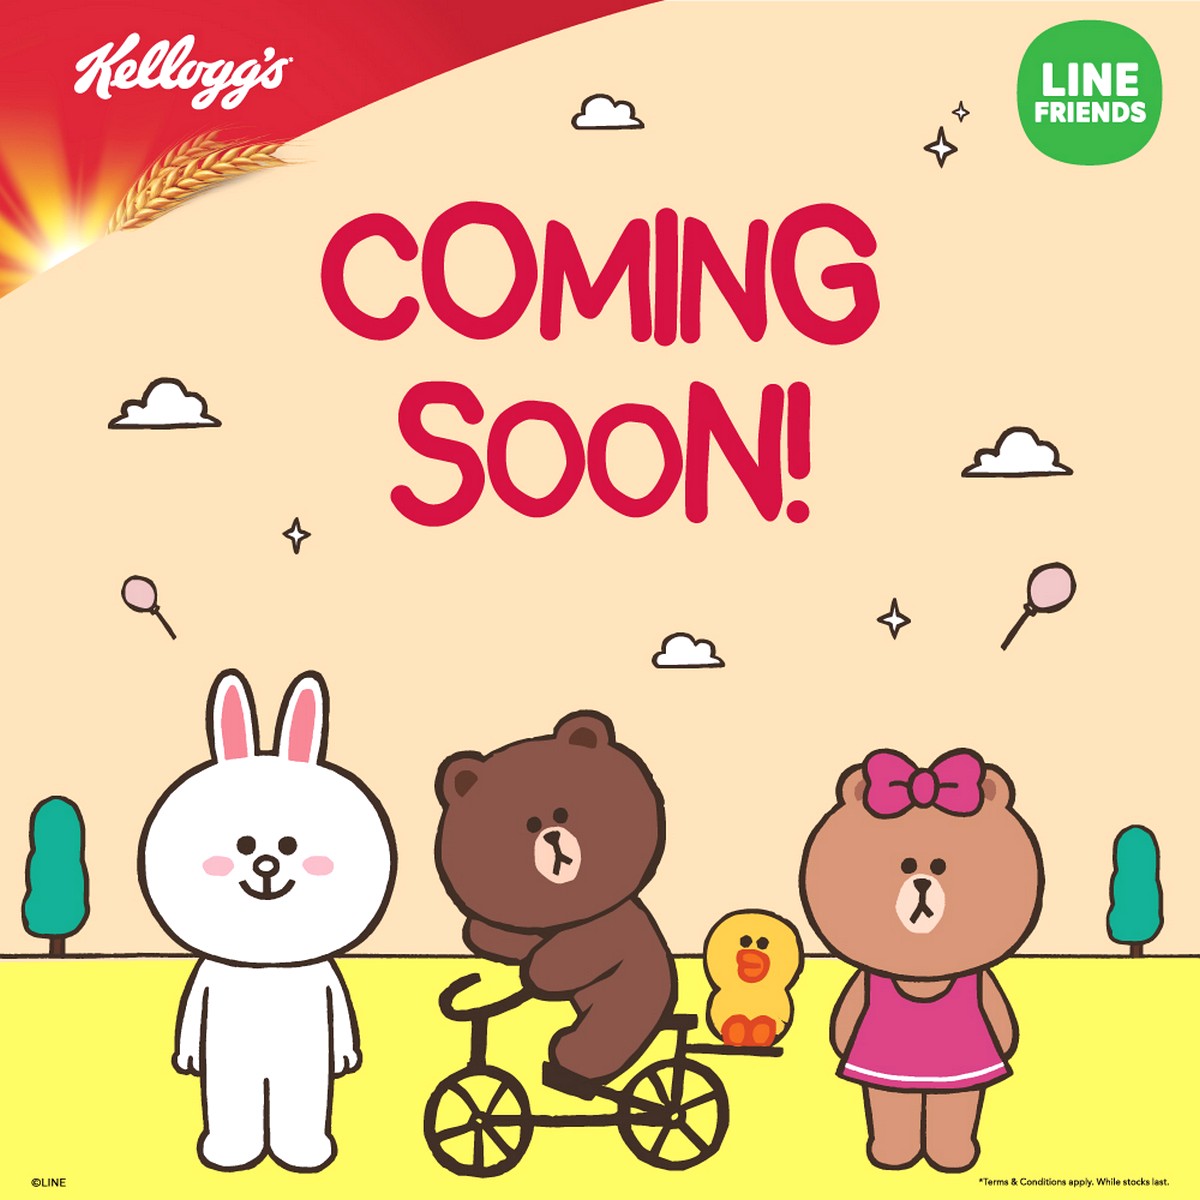 Kellogg S Malaysia Free New Line Friends Breakfast Box Two Different Styles Must Collection For Fans Everydayonsales Com News